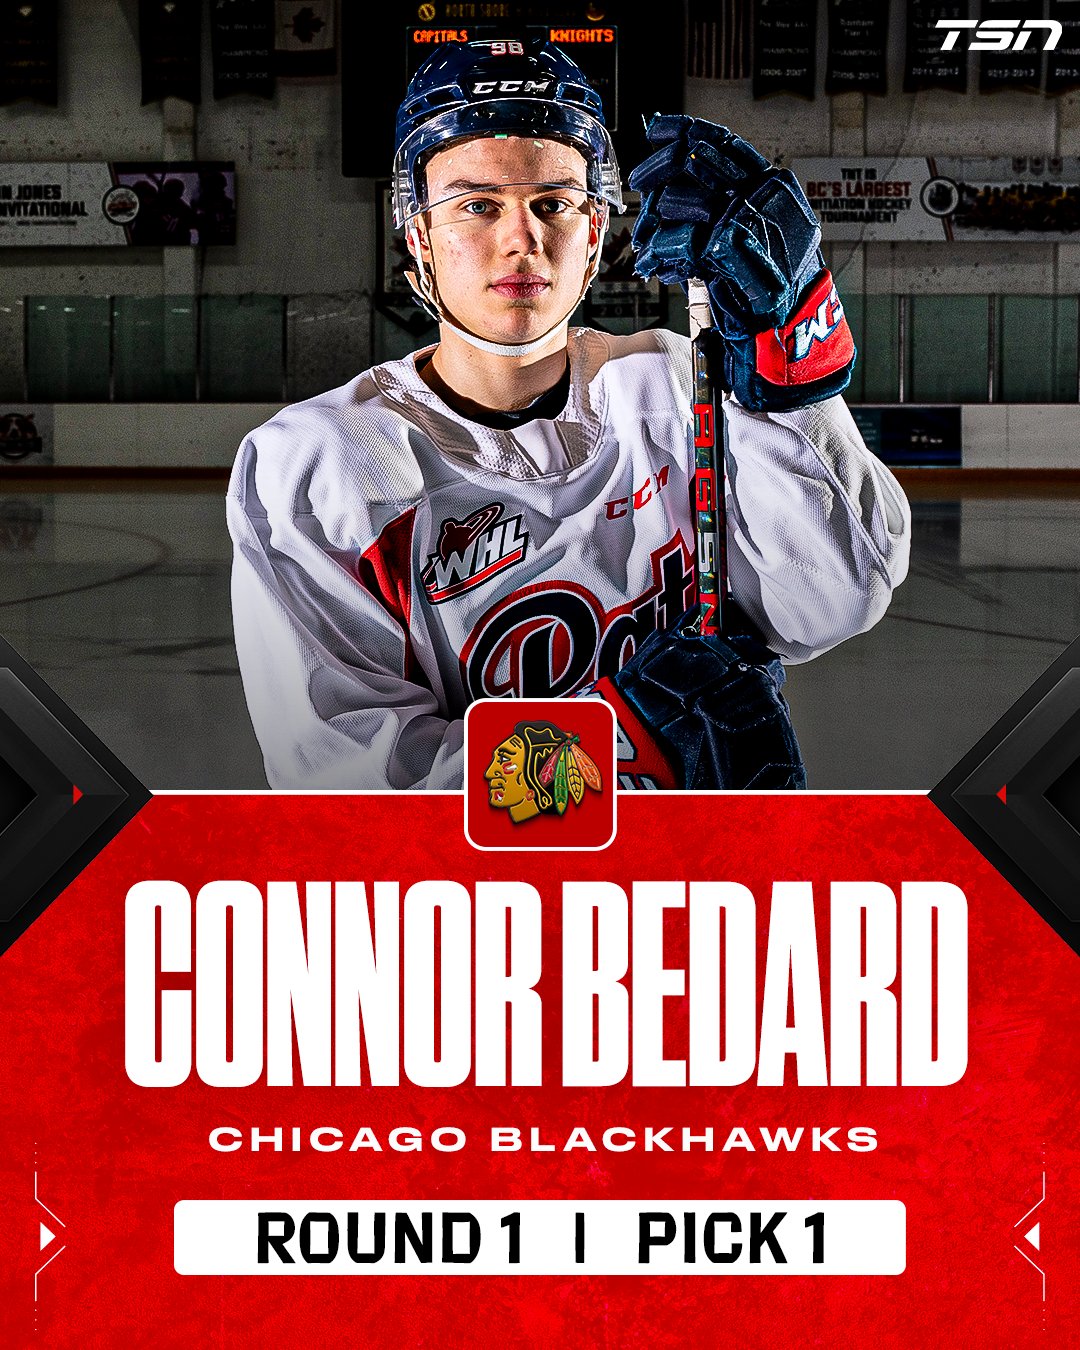 Blackhawks select Connor Bedard 1st overall